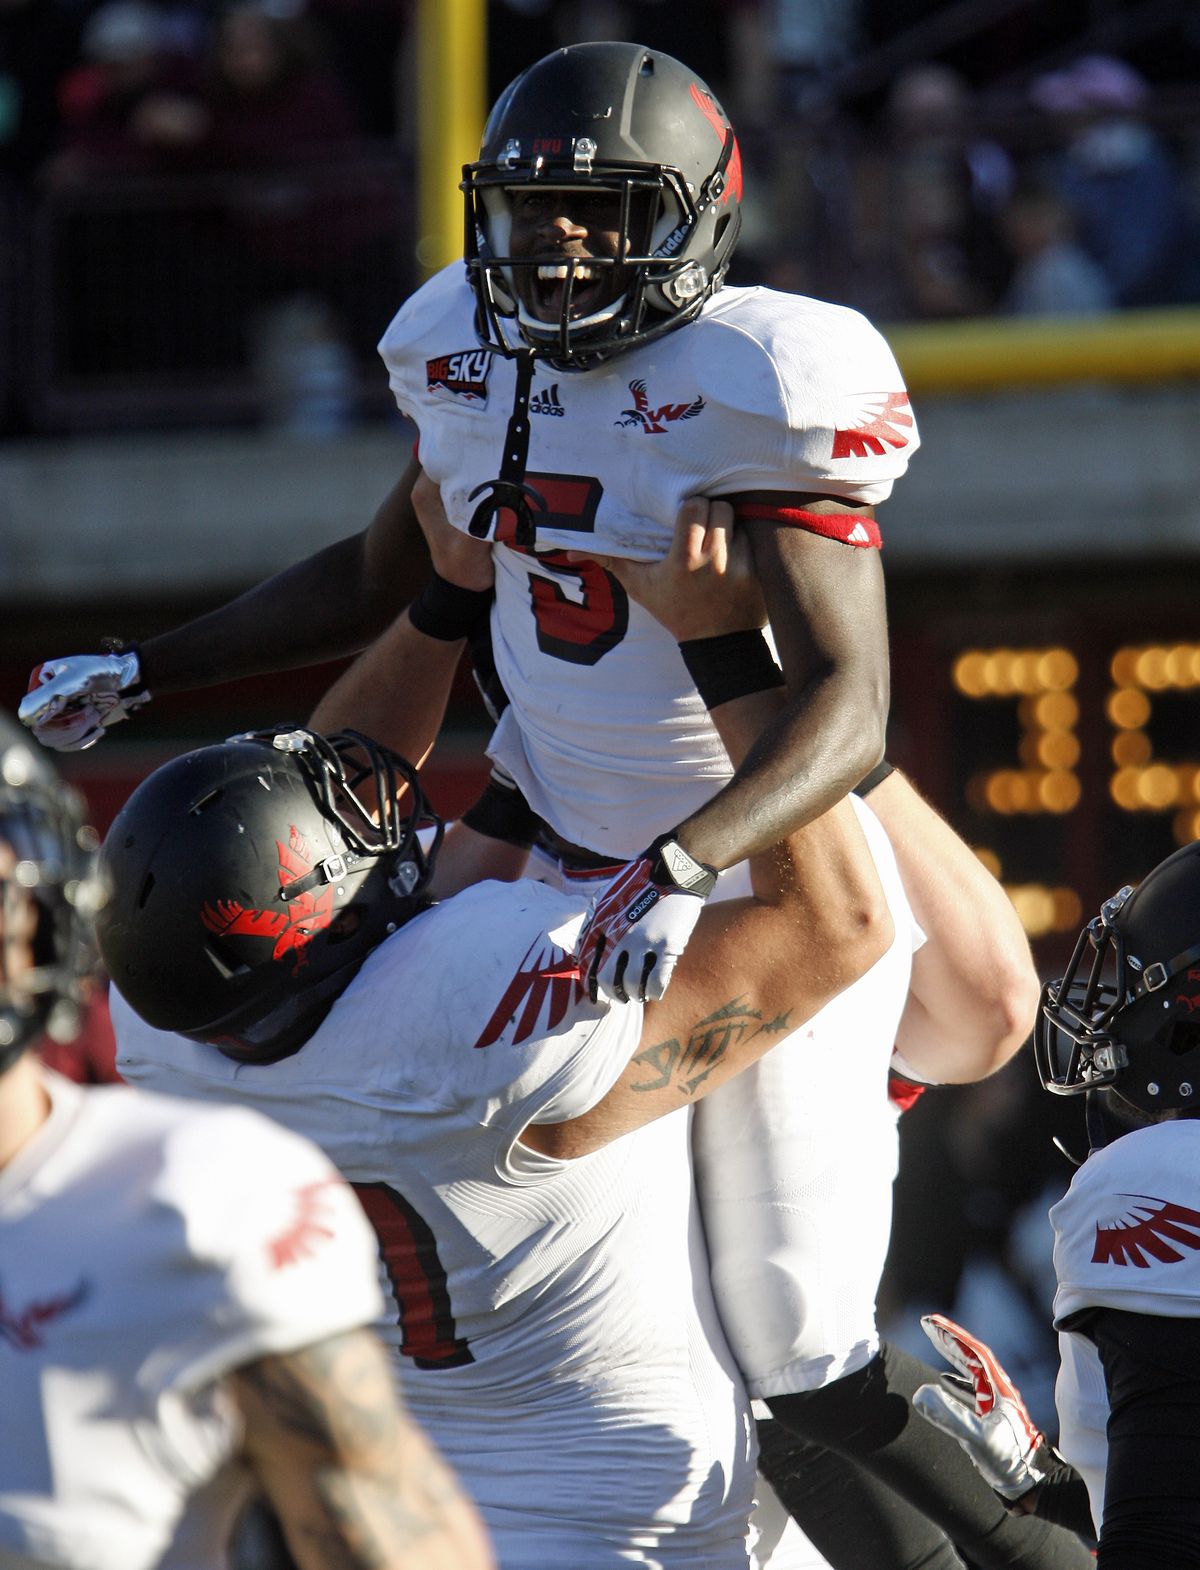 EWU running back Mario Brown is held aloft after hauling in a third-quarter pass for a touchdown in Missoula. (Associated Press)